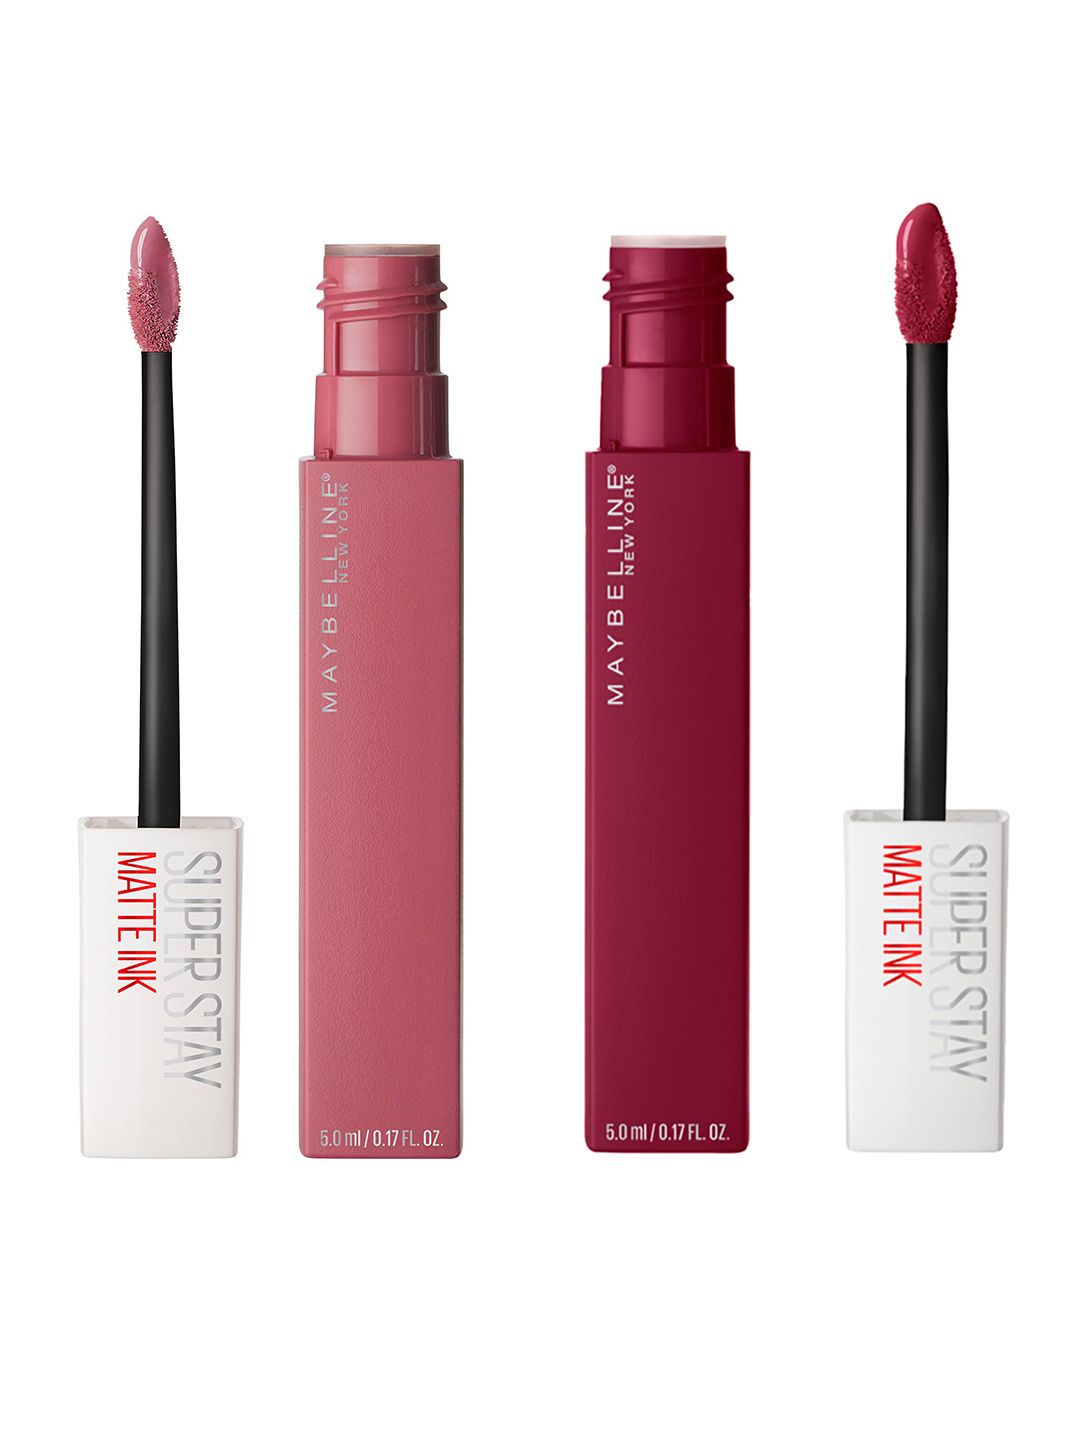 Maybelline New York Set of 2 Super Stay Matte Ink Lipsticks- Lover 15 & Founder 115 Price in India